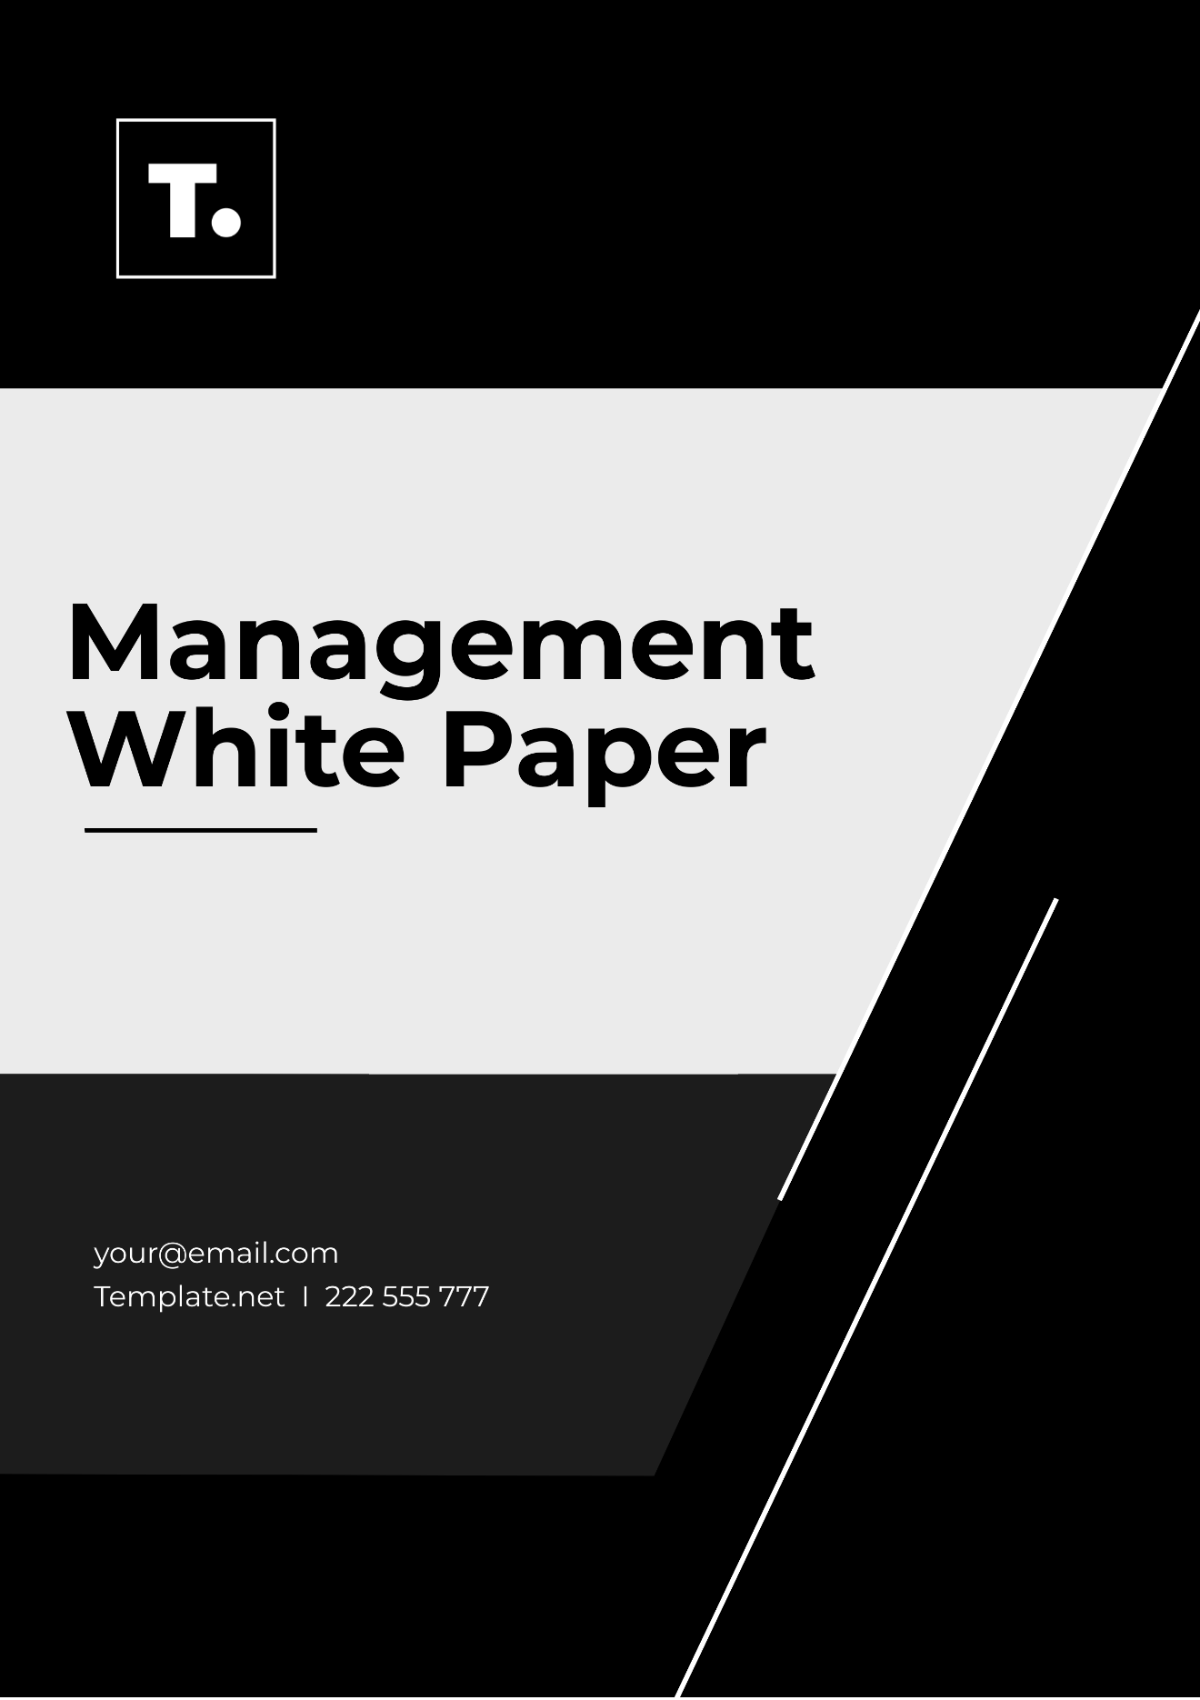 Management White Paper Template